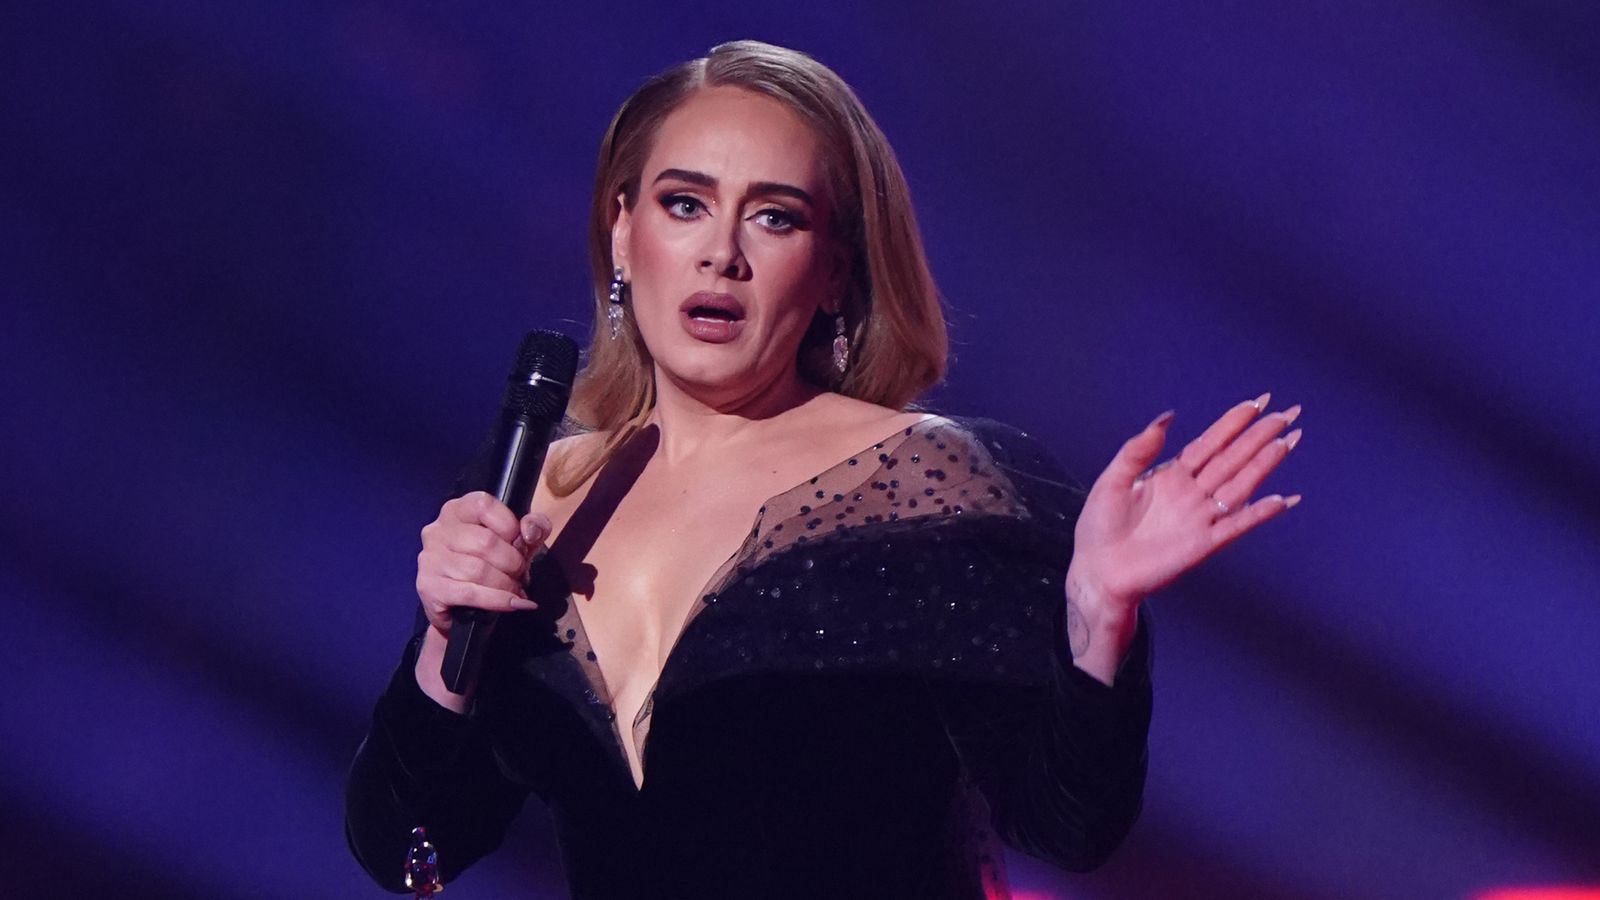 Adele confirms she is extending her Las Vegas residency and will record shows for film release